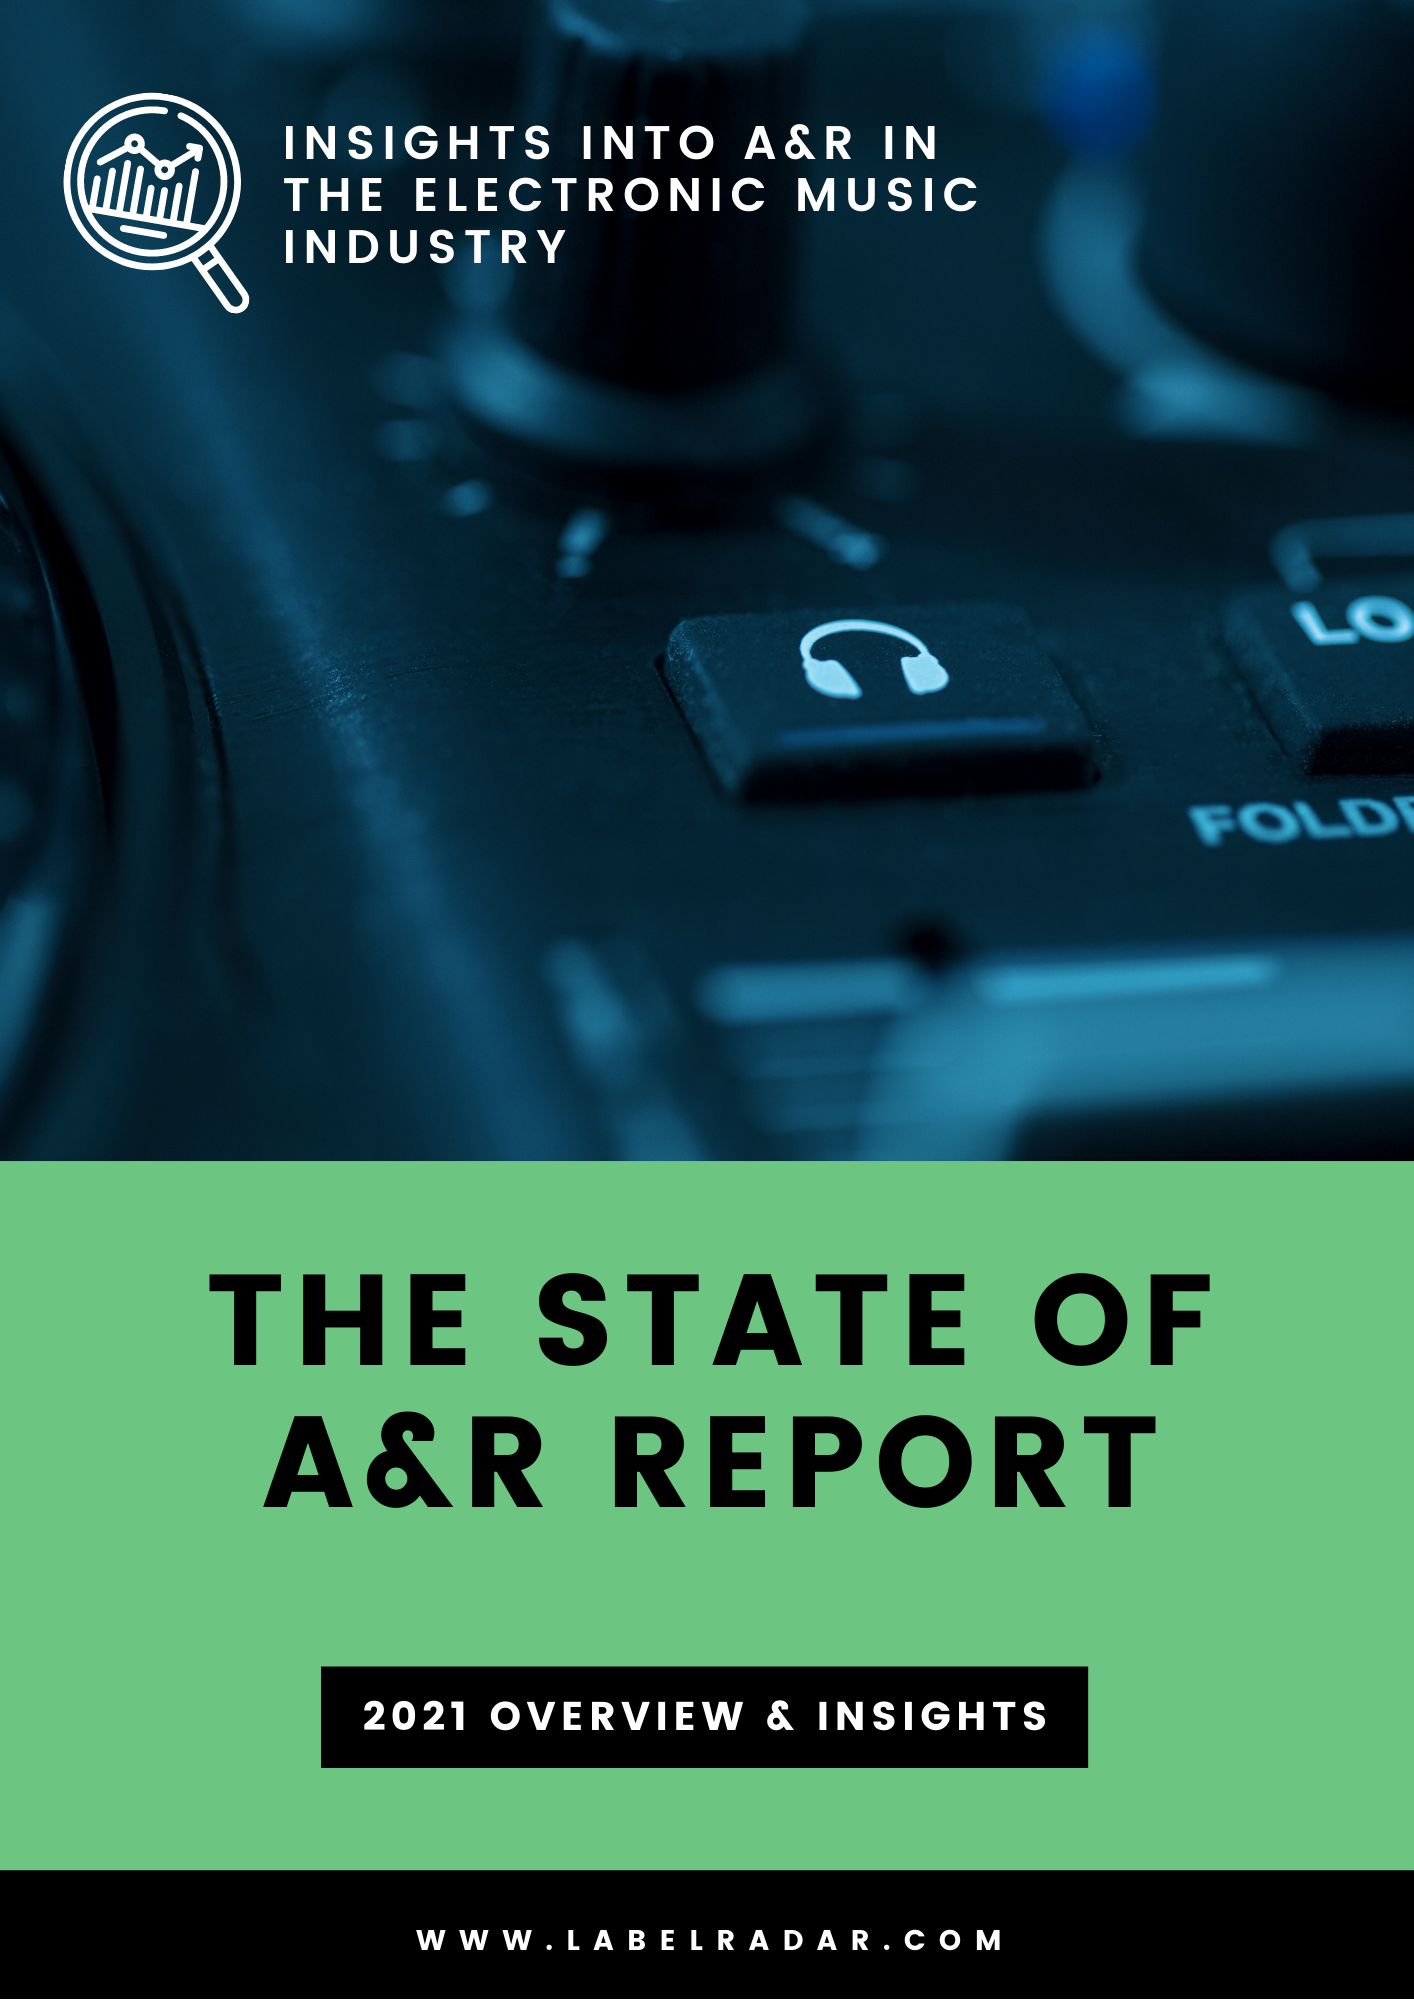 the state of a&r in 2021 report